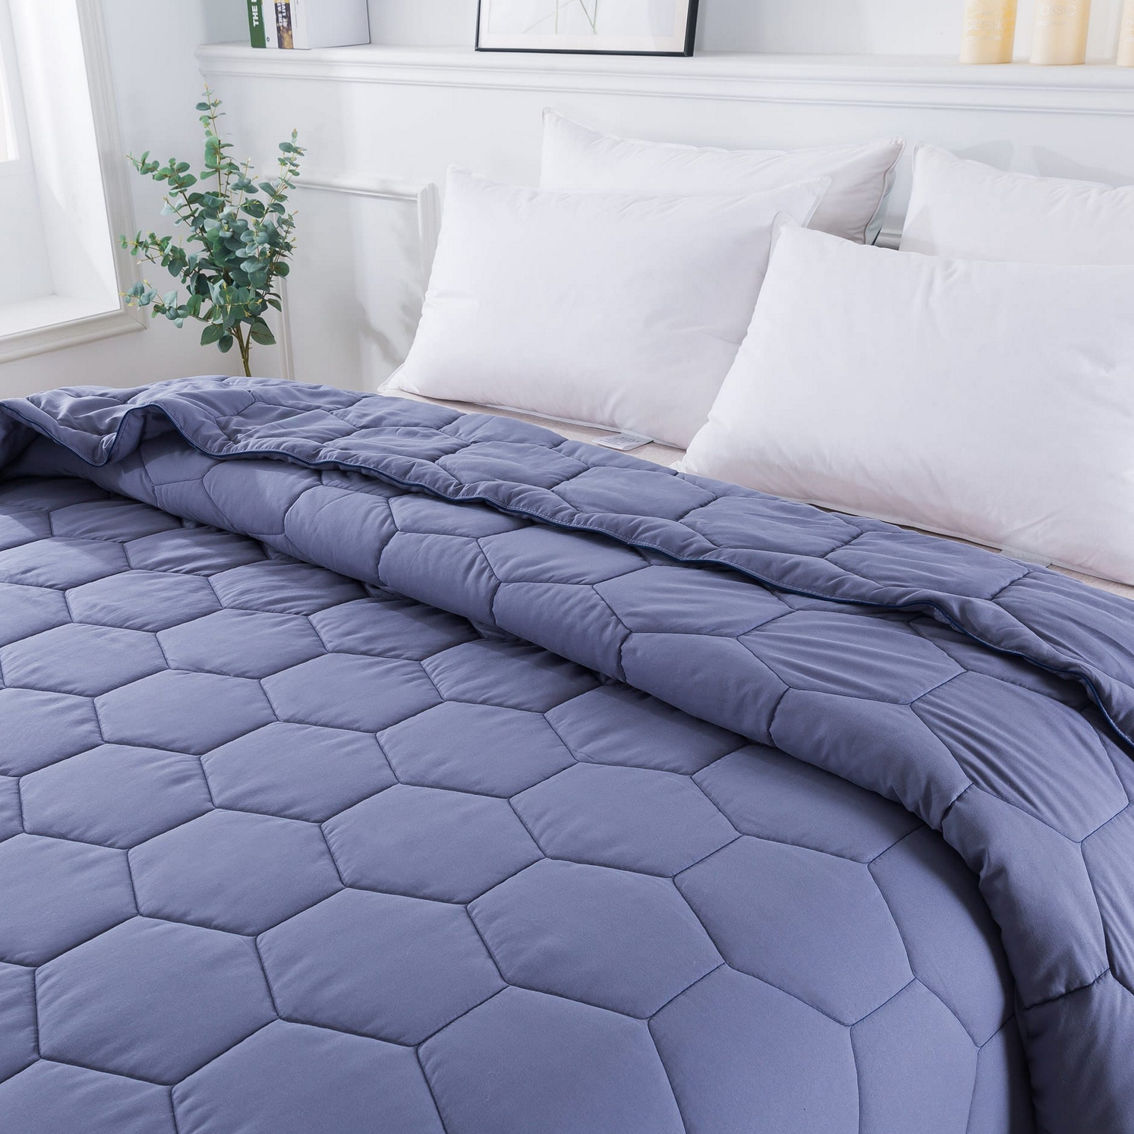 Honeycomb Color Contrast Stitched Down Alternative Blanket - Image 2 of 5